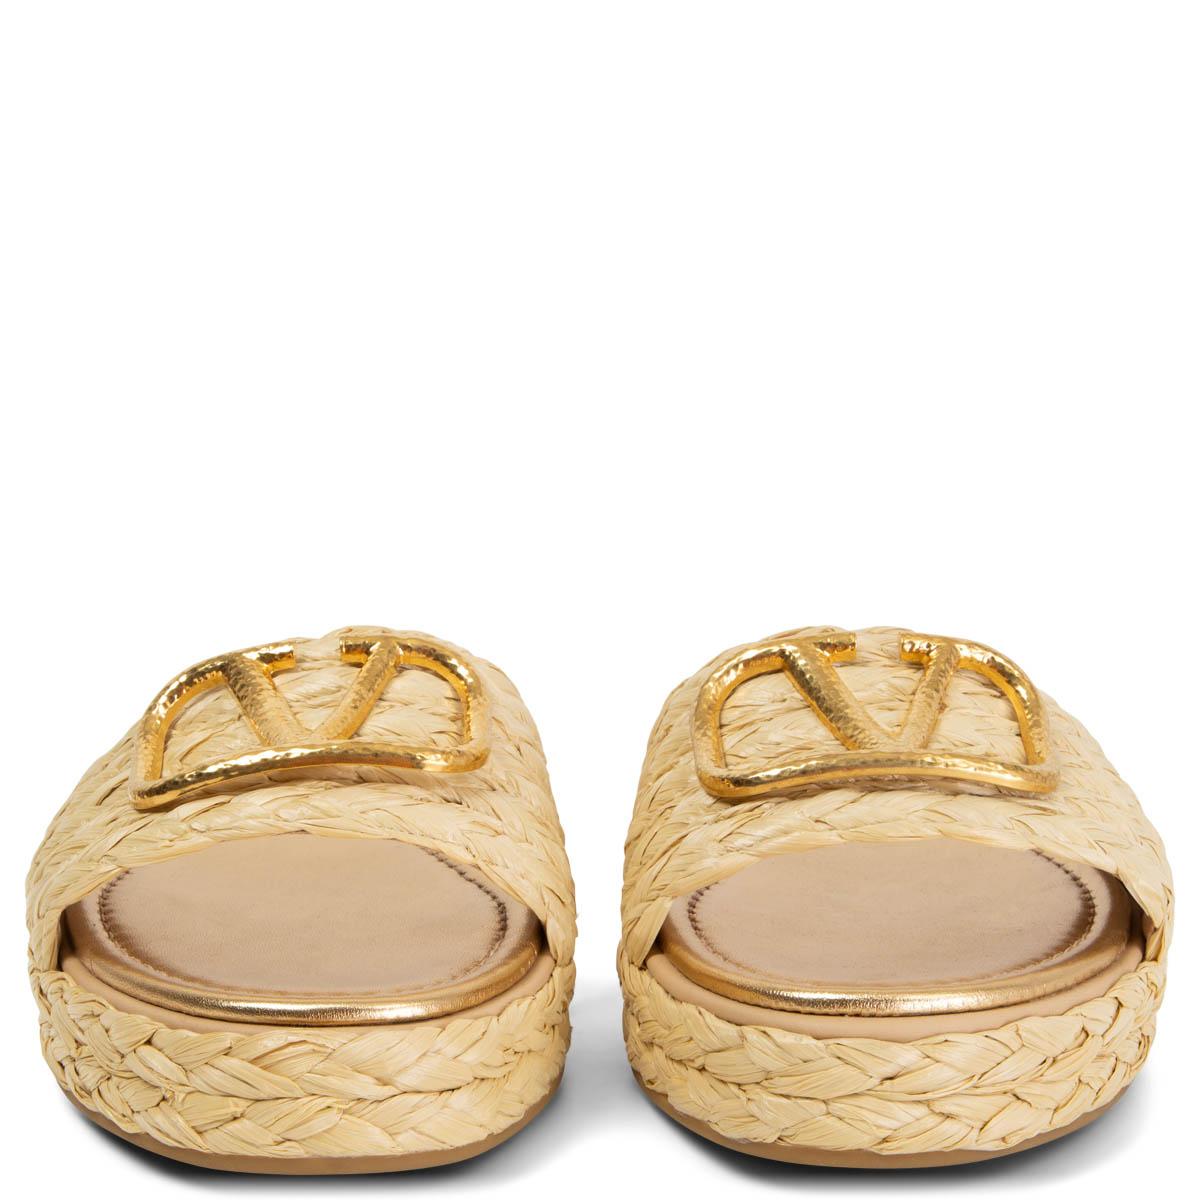 100% authentic Valentino VLOGO espadrille slide sandals in light beige natural raffia with the Valentino logo in hammered matte gold-tone. Have been worn once or twice and are in excellent condition. 

Measurements
Imprinted Size	38
Shoe